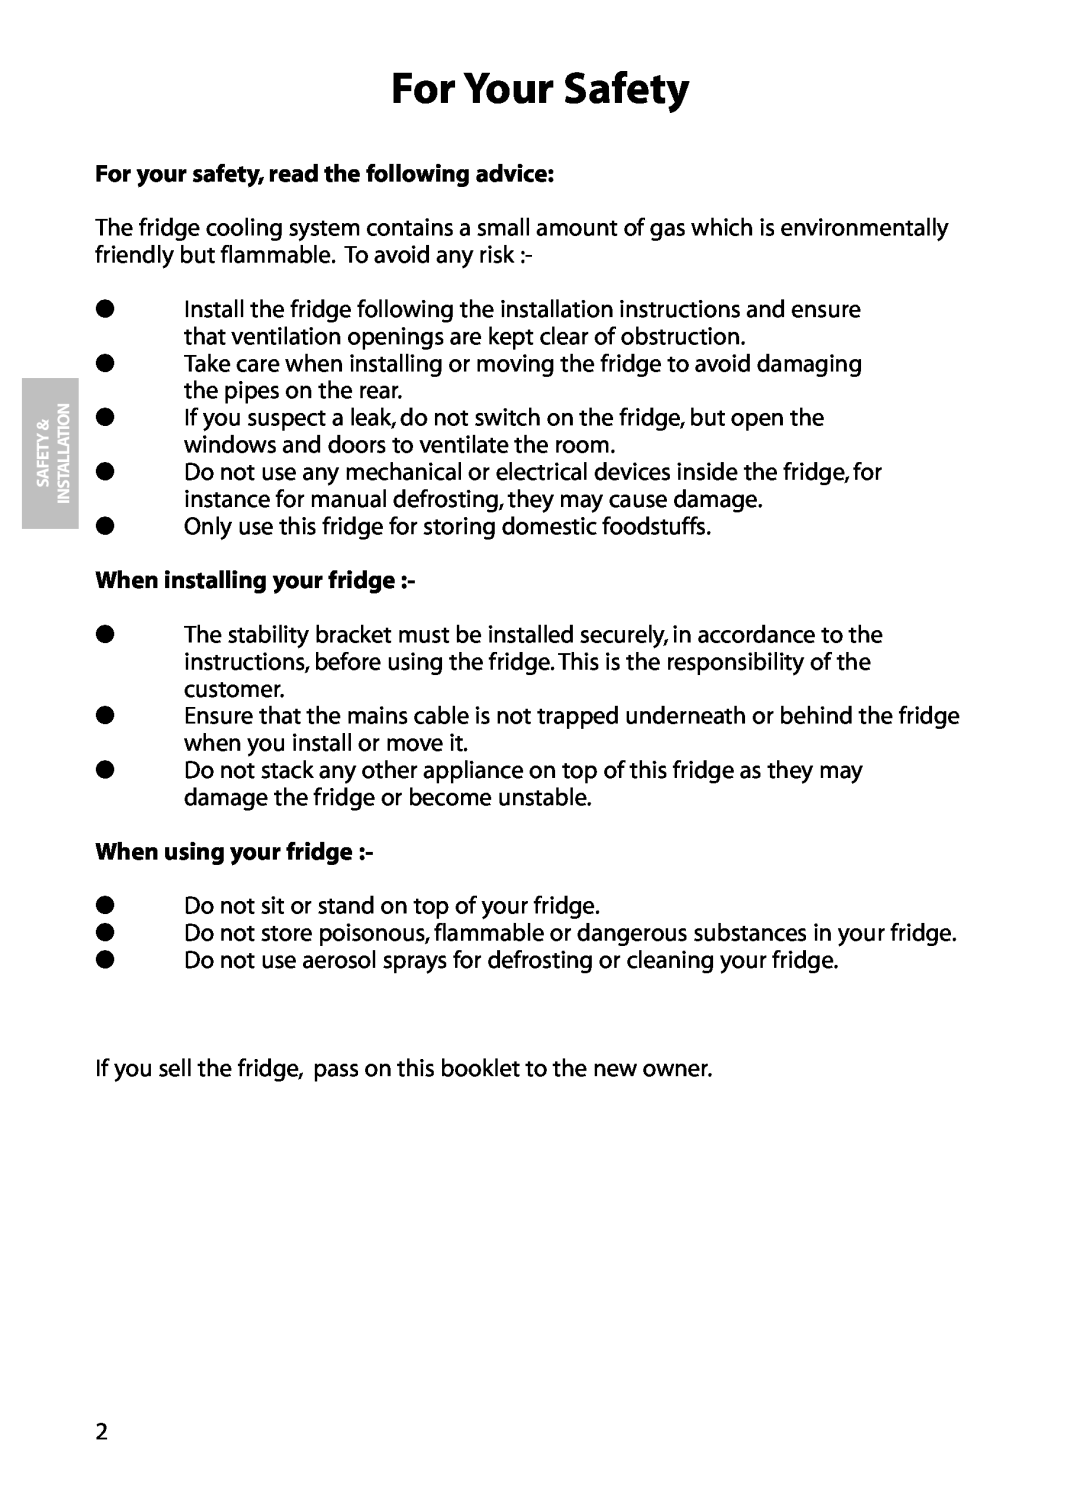 Hotpoint RLA84 manual For Your Safety, For your safety, read the following advice, When installing your fridge 